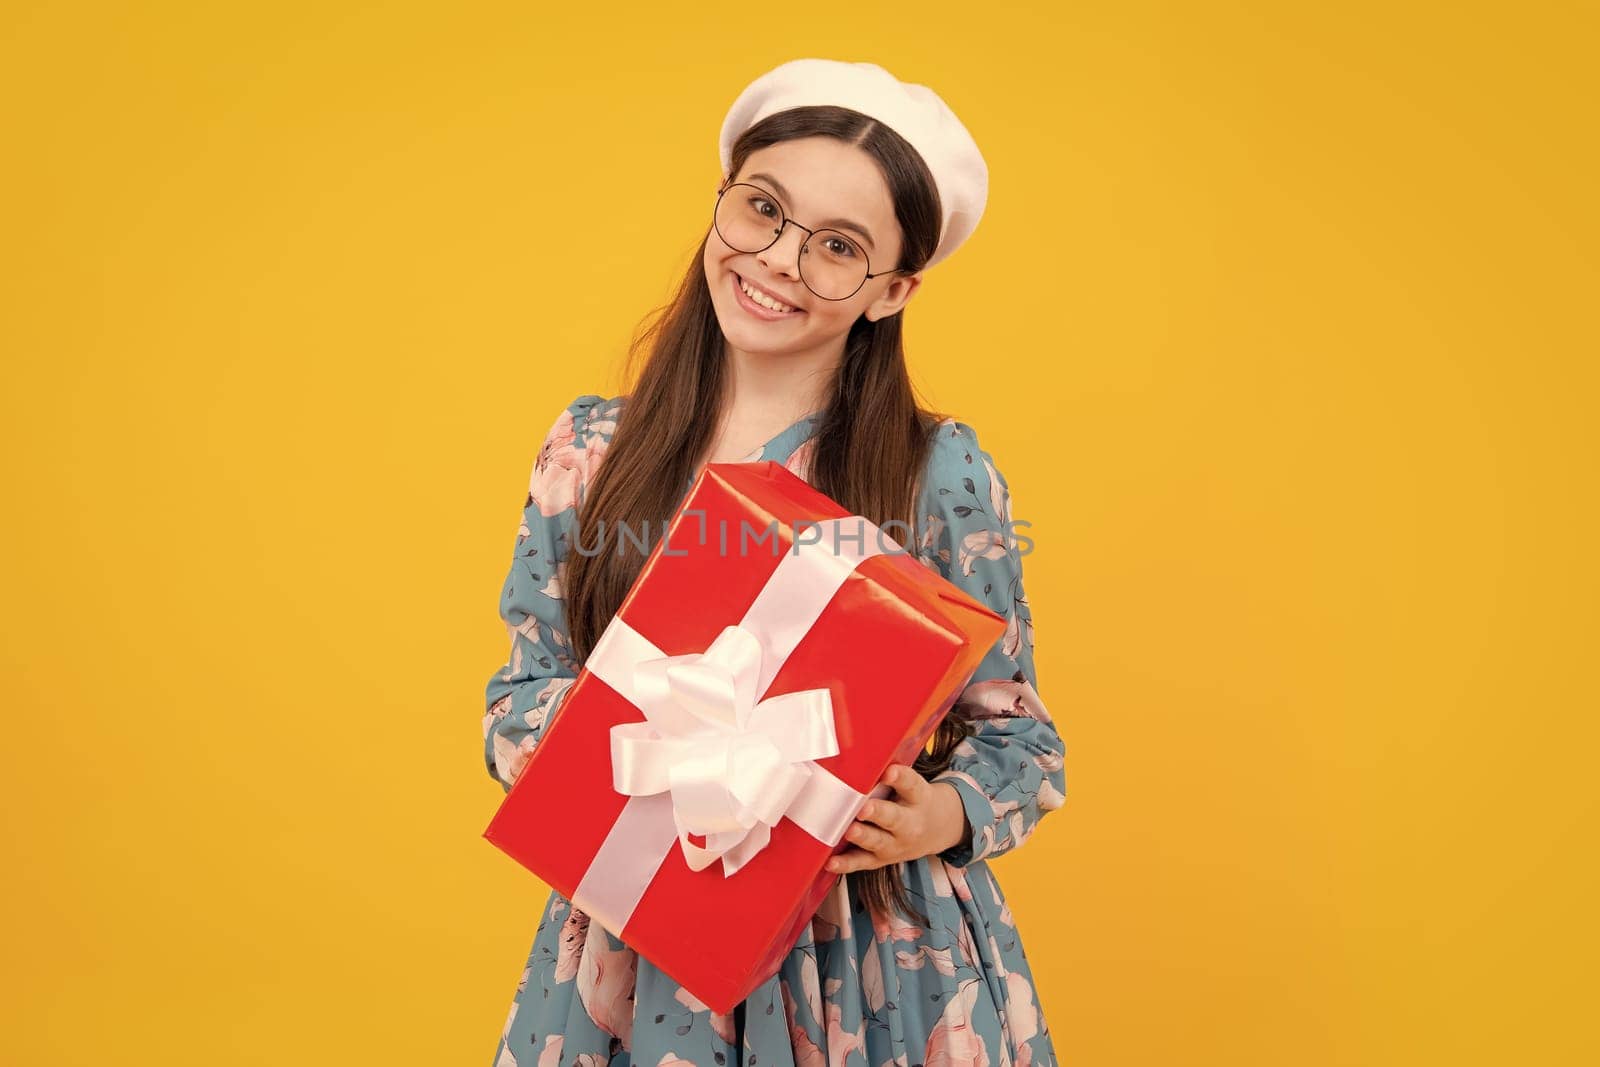 Emotional teenager child hold gift on birthday. Funny kid girl holding gift boxes celebrating happy New Year or Christmas. Happy teenager, positive and smiling emotions. by RedFoxStudio